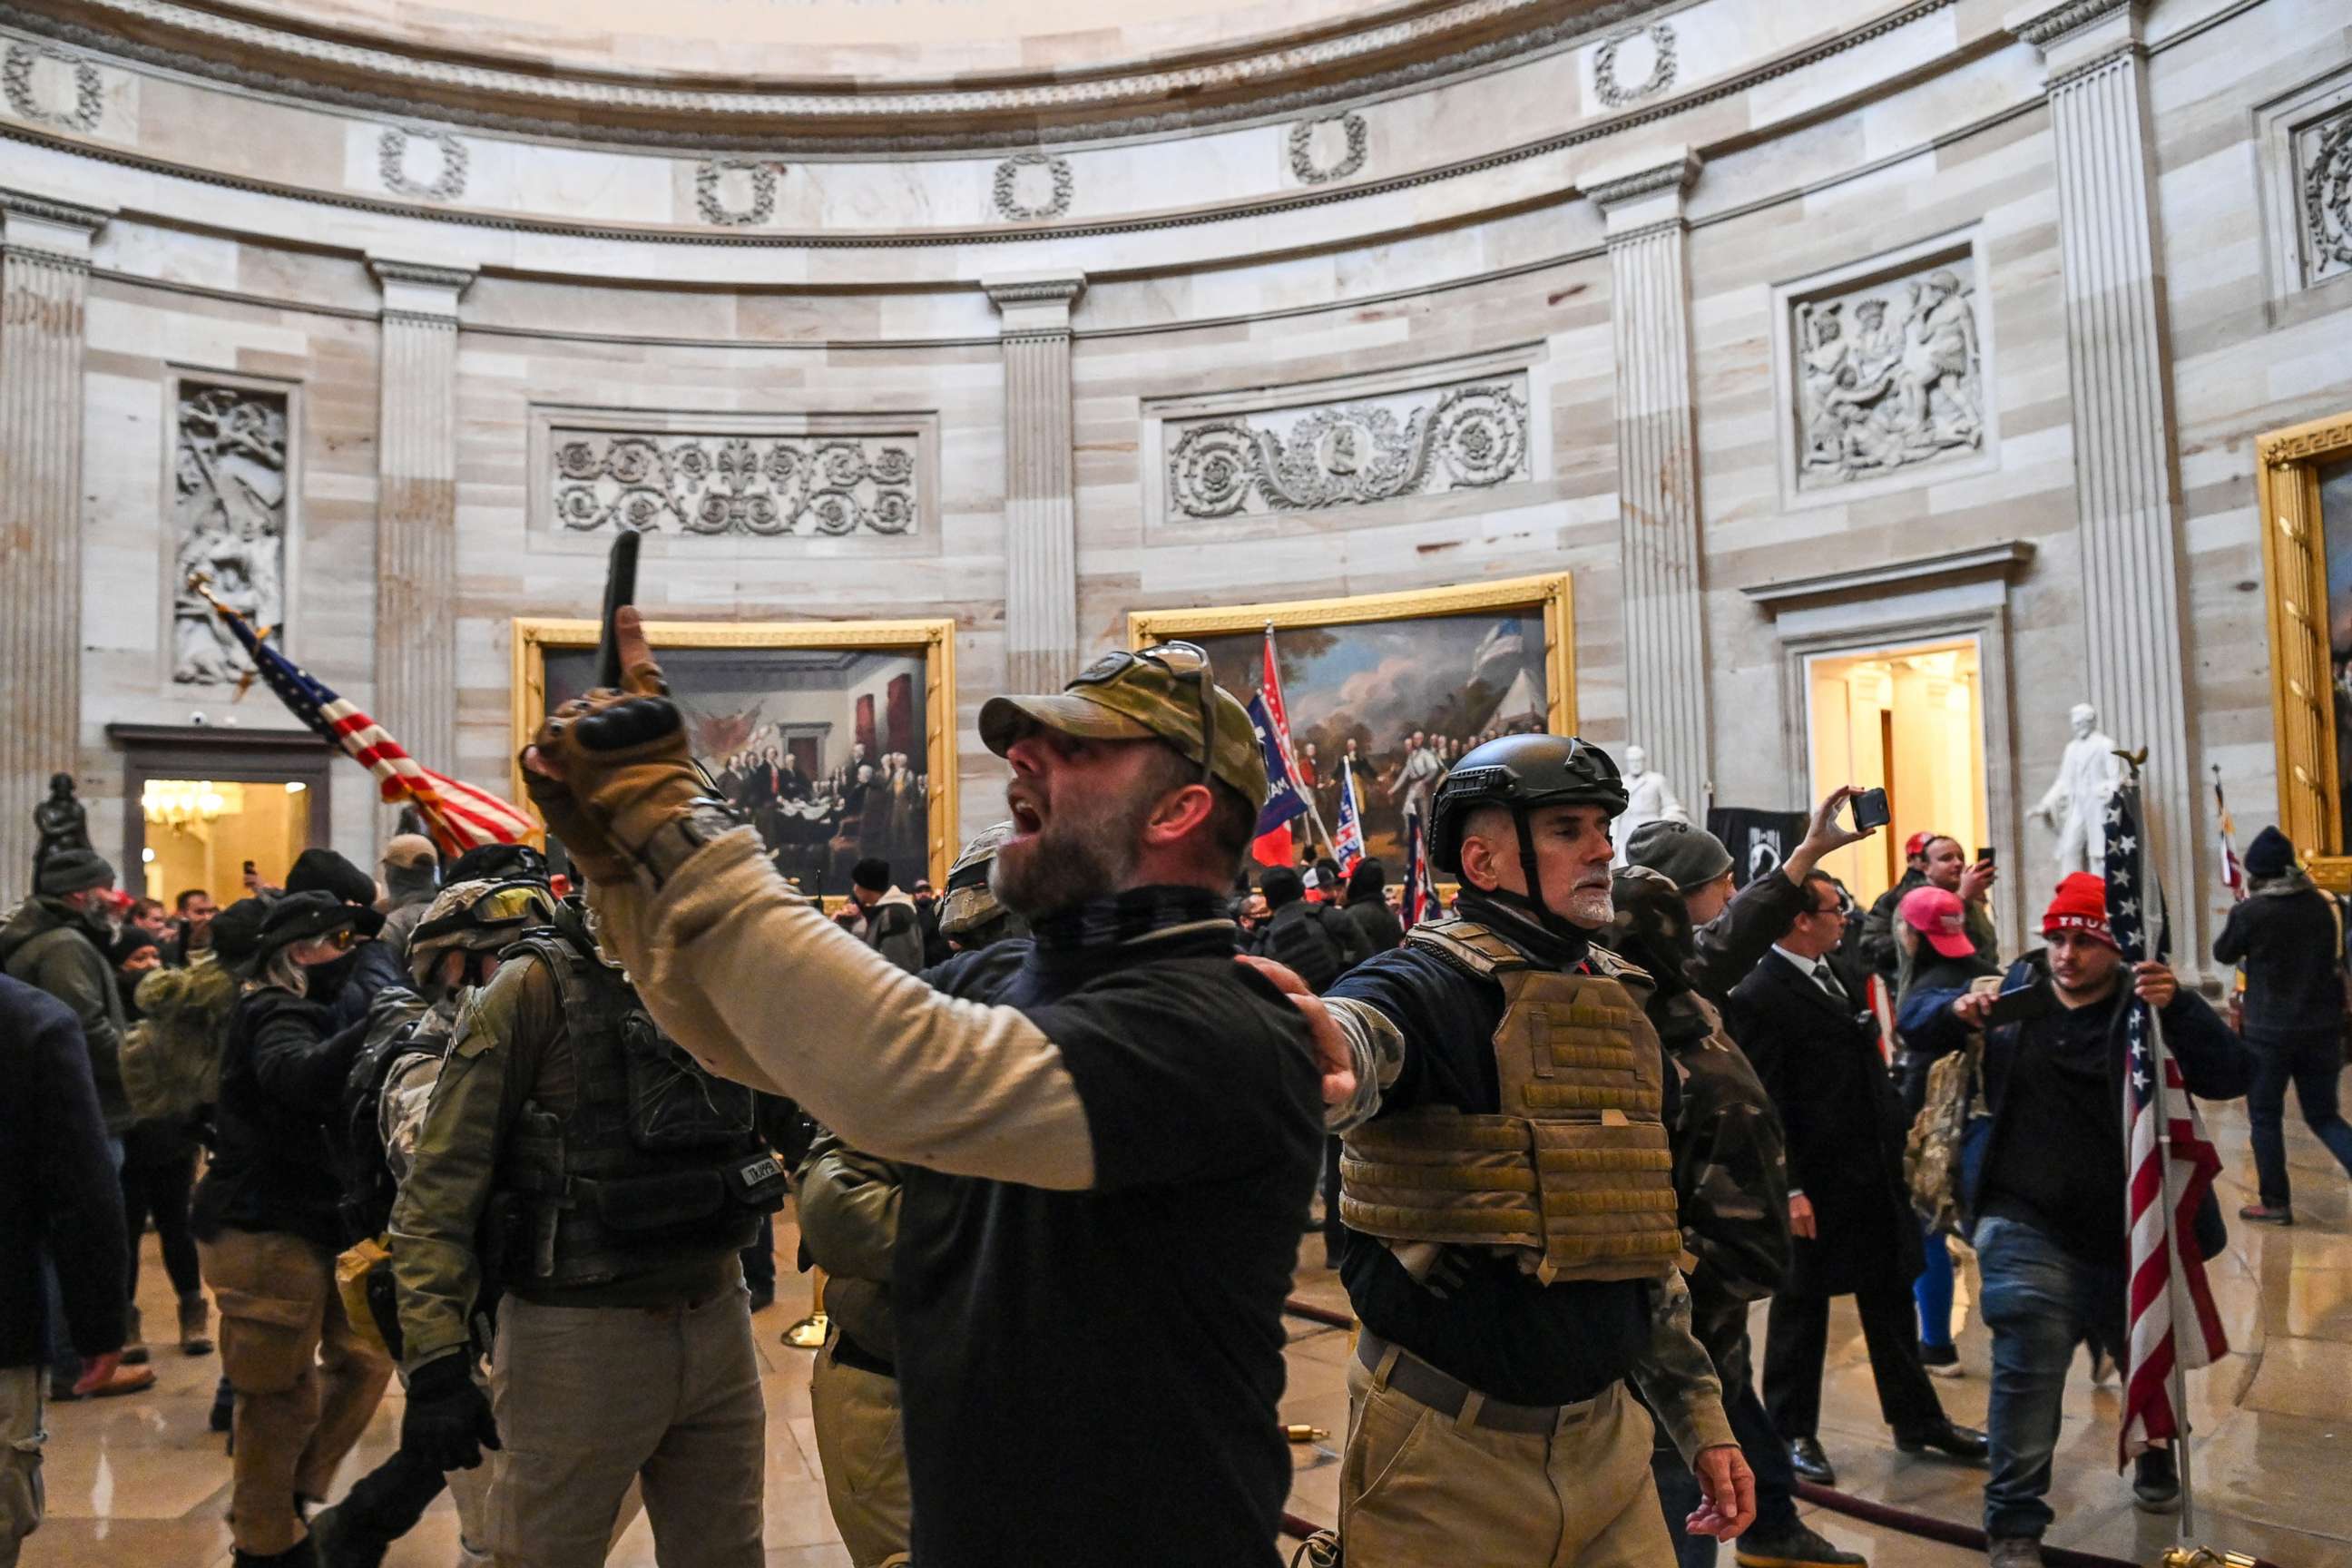 PHOTO: Supporters of President Donald Trump, including Army and Navy reserve veteran and Oath Keeper member (center right with helmet) Graydon Young, enter the US Capitol's Rotunda on Jan. 6, 2021, in Washington.